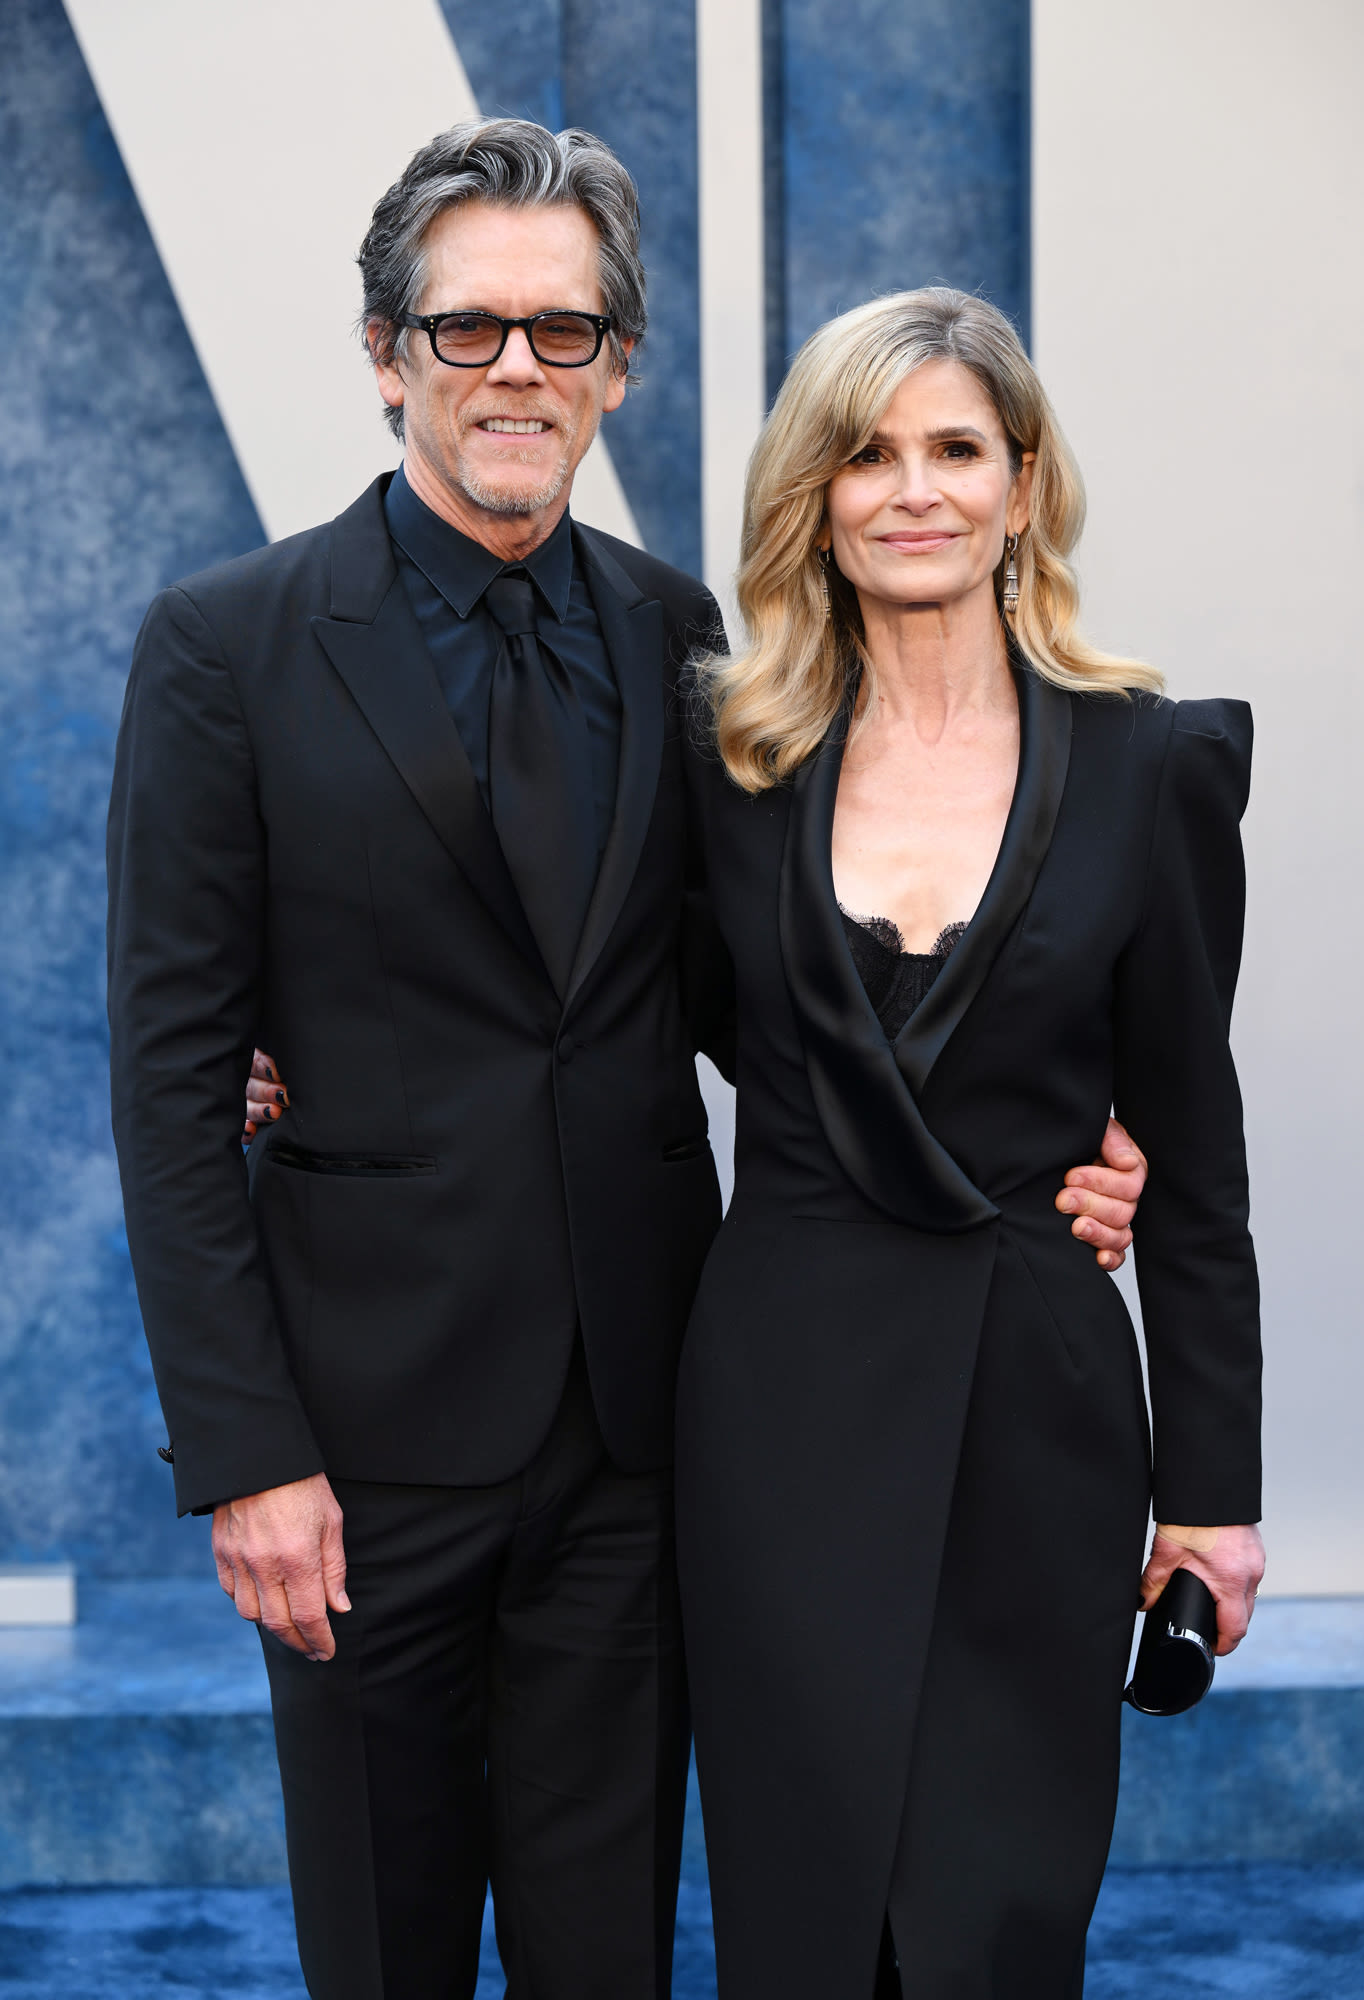 Kyra Sedgwick Reveals She and Kevin Bacon Have ‘Absolutely’ Fooled Around in Movie Set Trailers